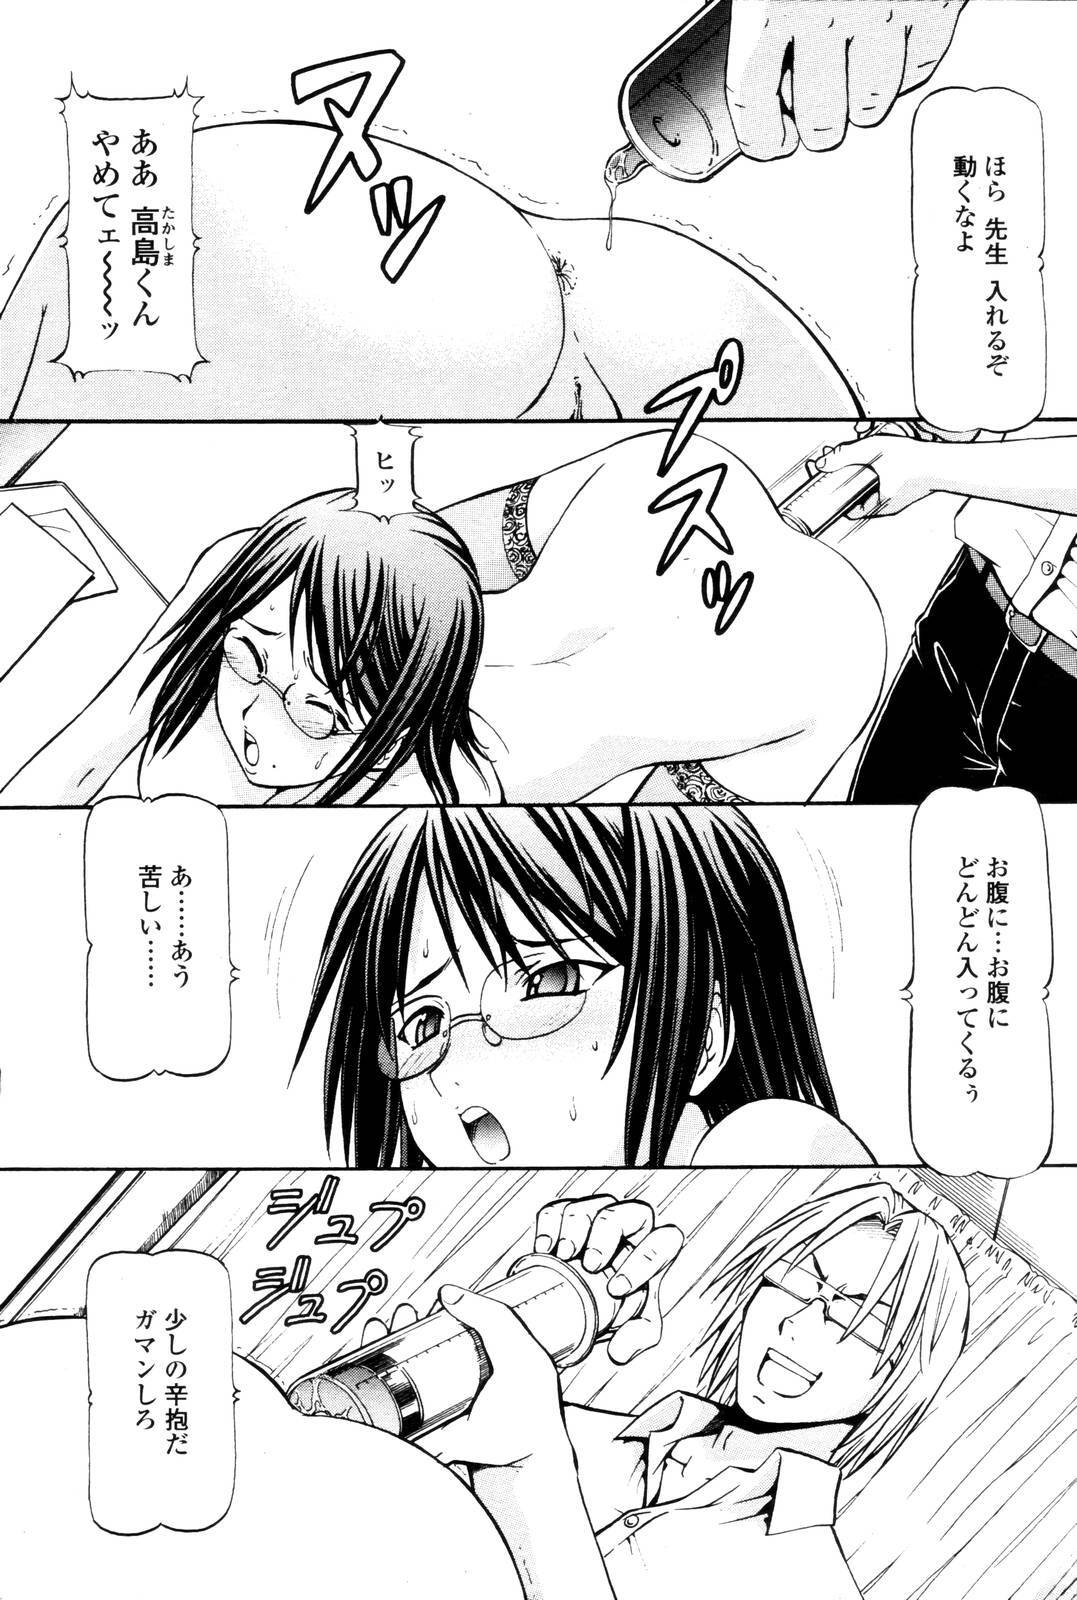 COMIC Momohime 2006-10 page 29 full